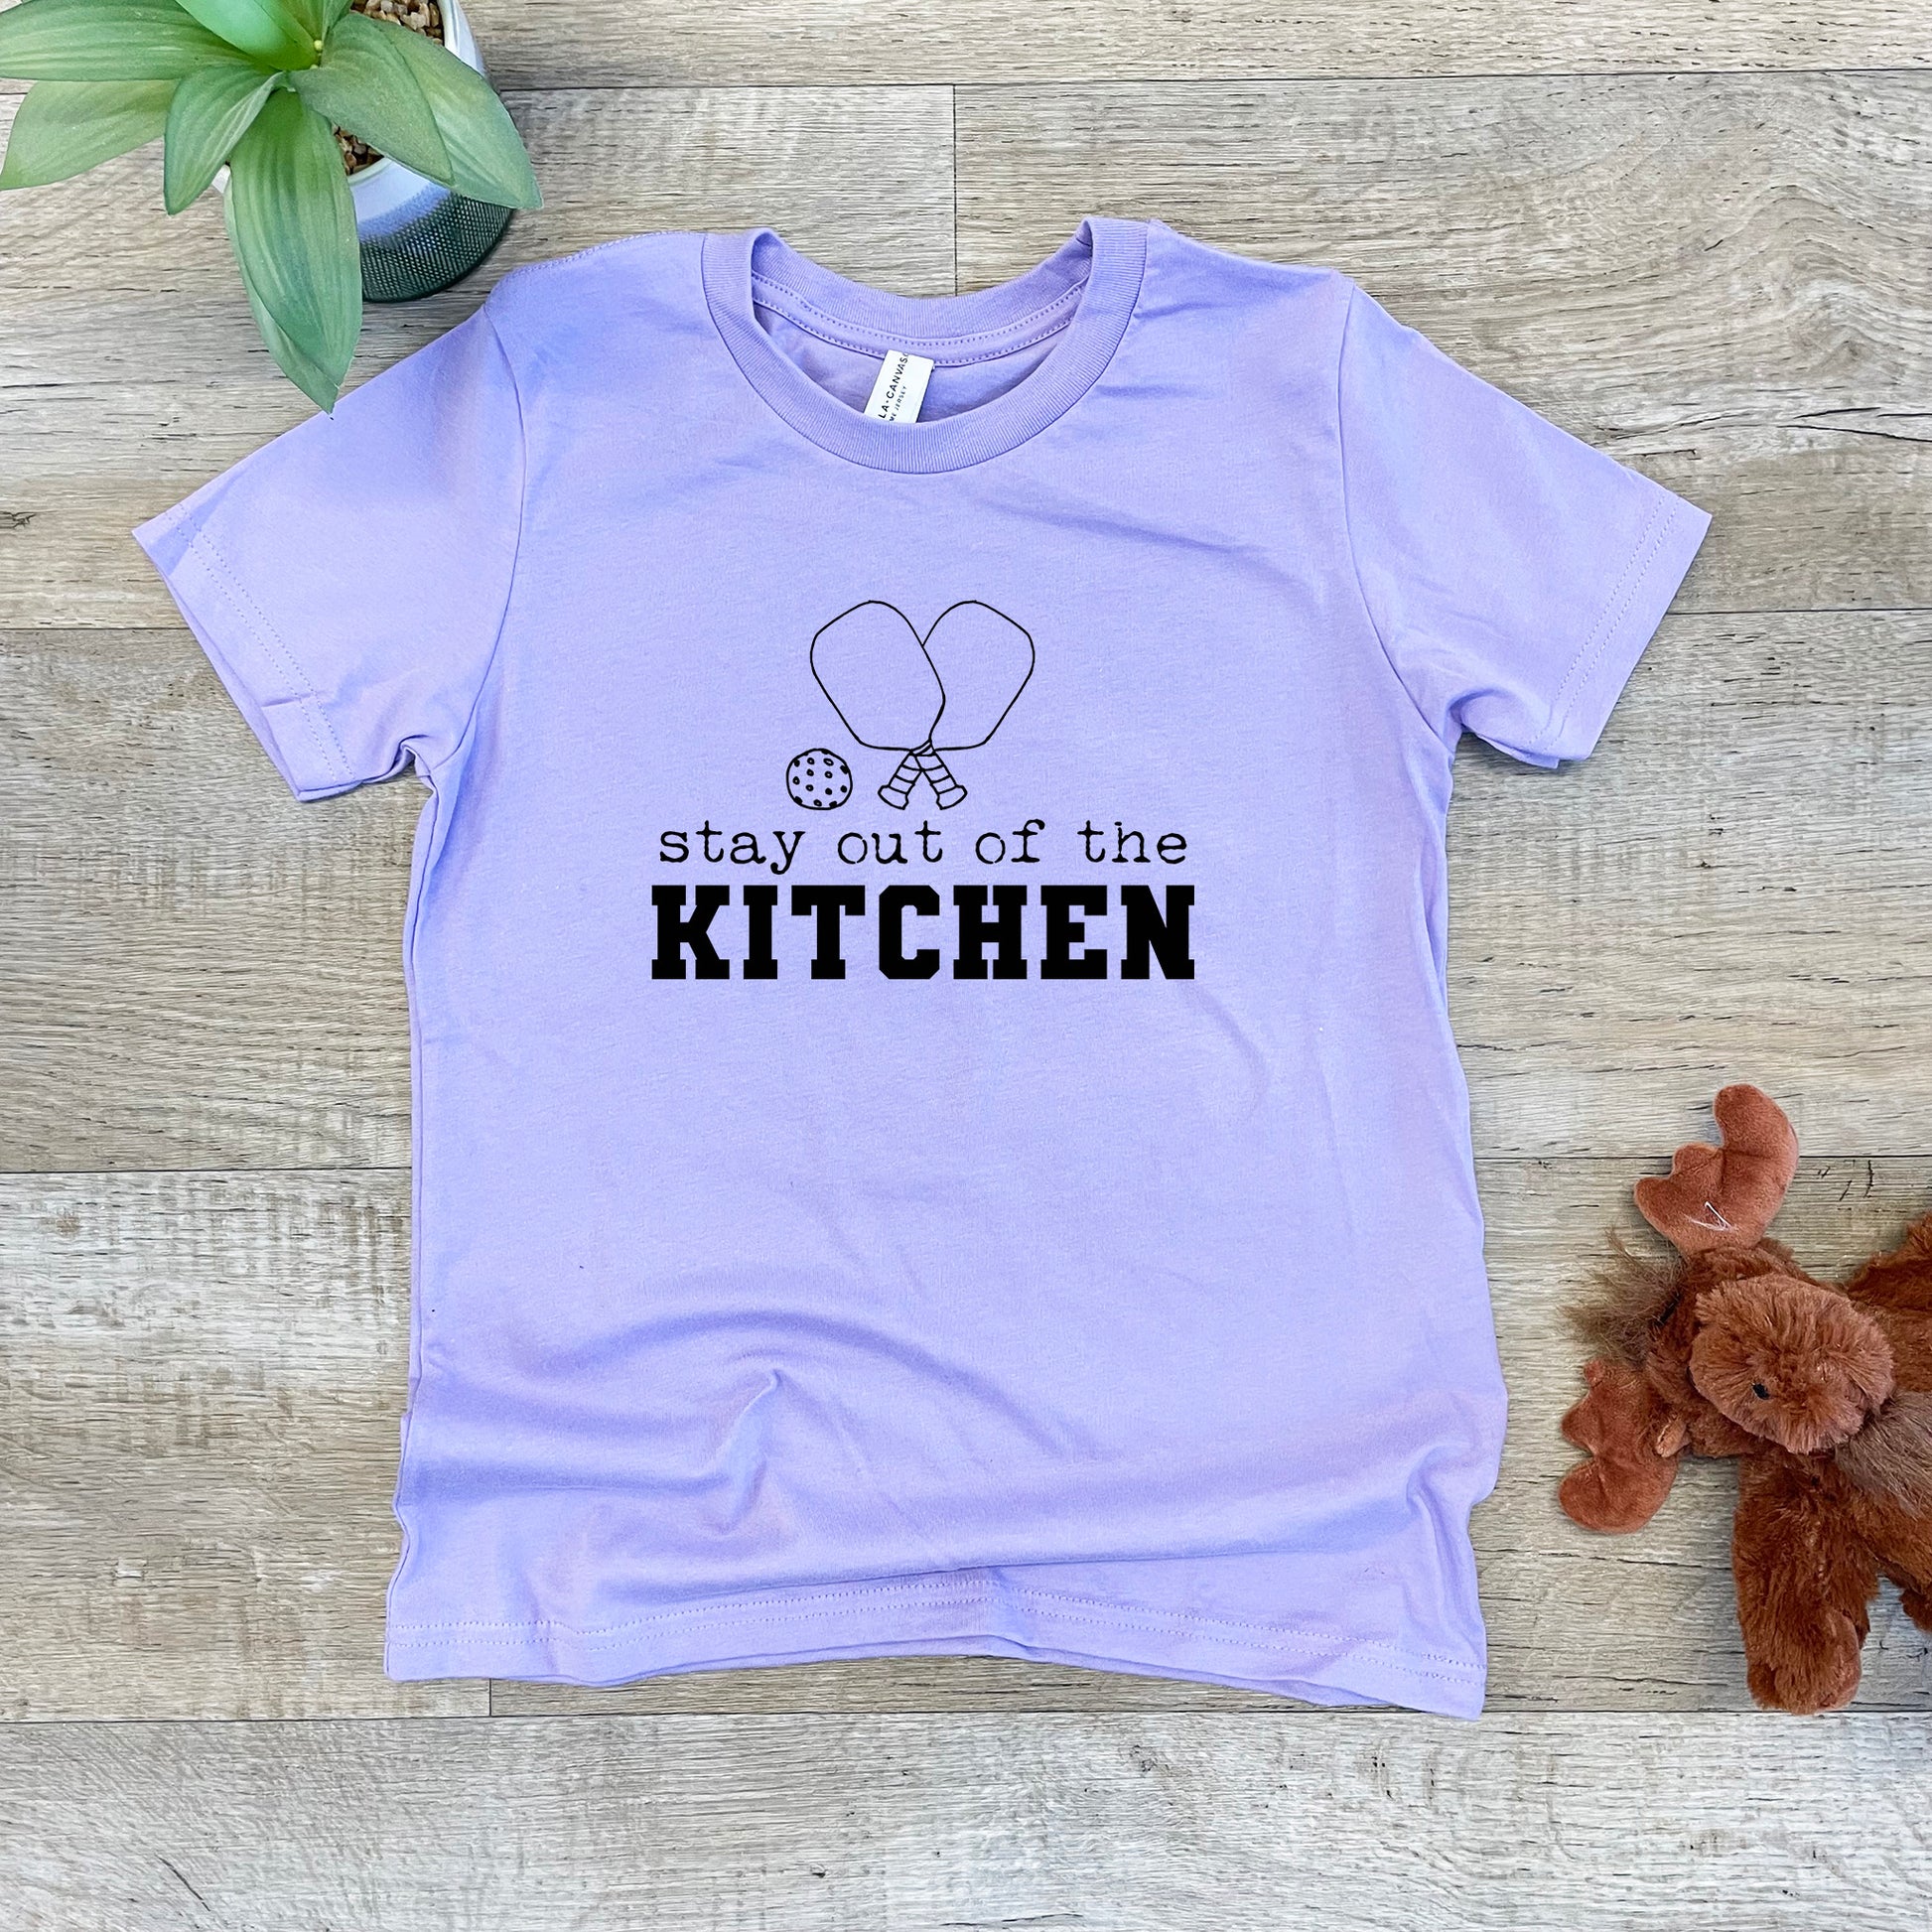 a t - shirt that says stay out of the kitchen next to a teddy bear